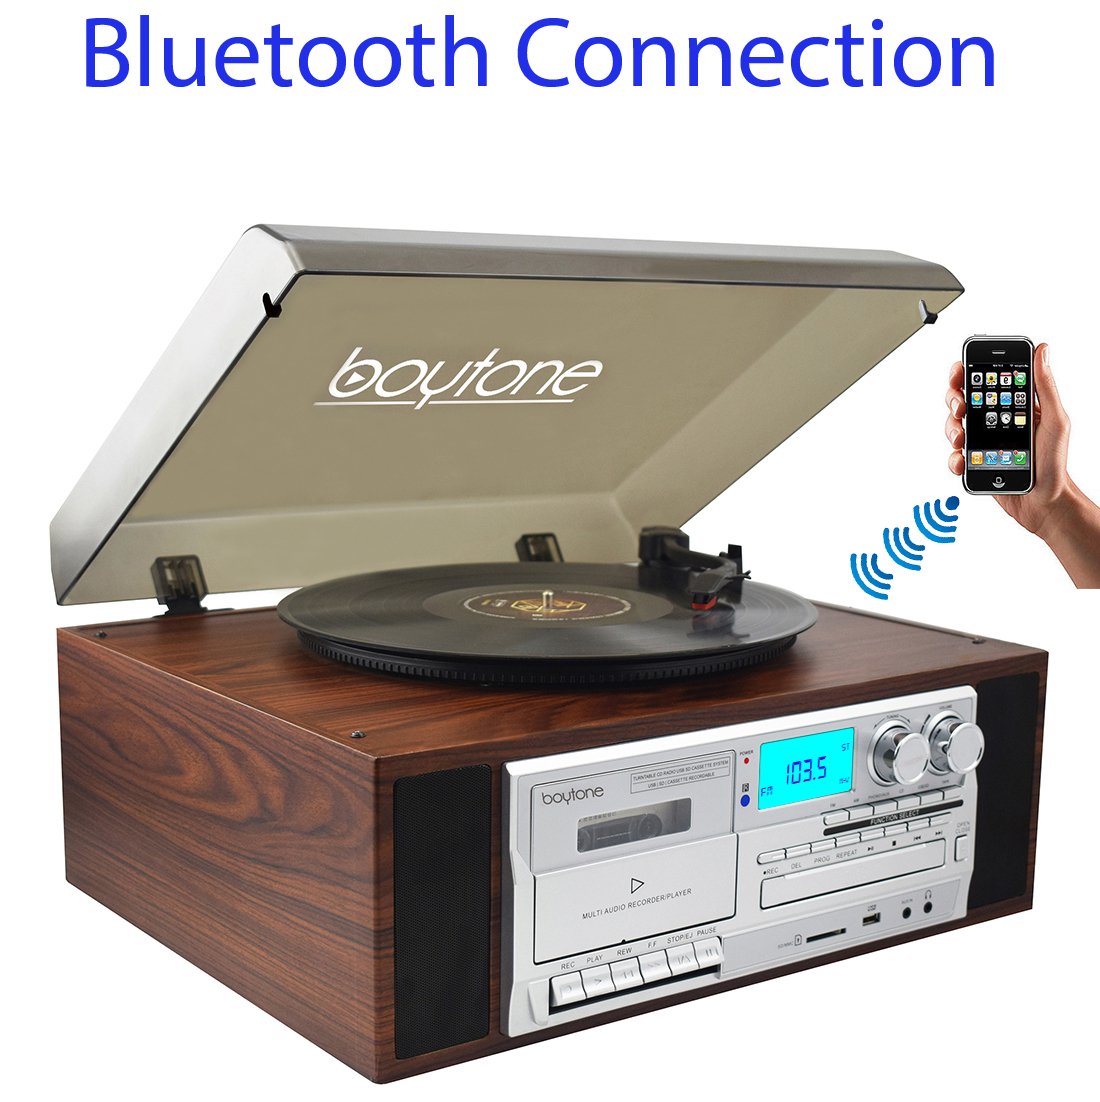 Boytone BT-38SM, Bluetooth Classic Style Record Player Turntable with AM/FM Radio, CD / Cassette Player